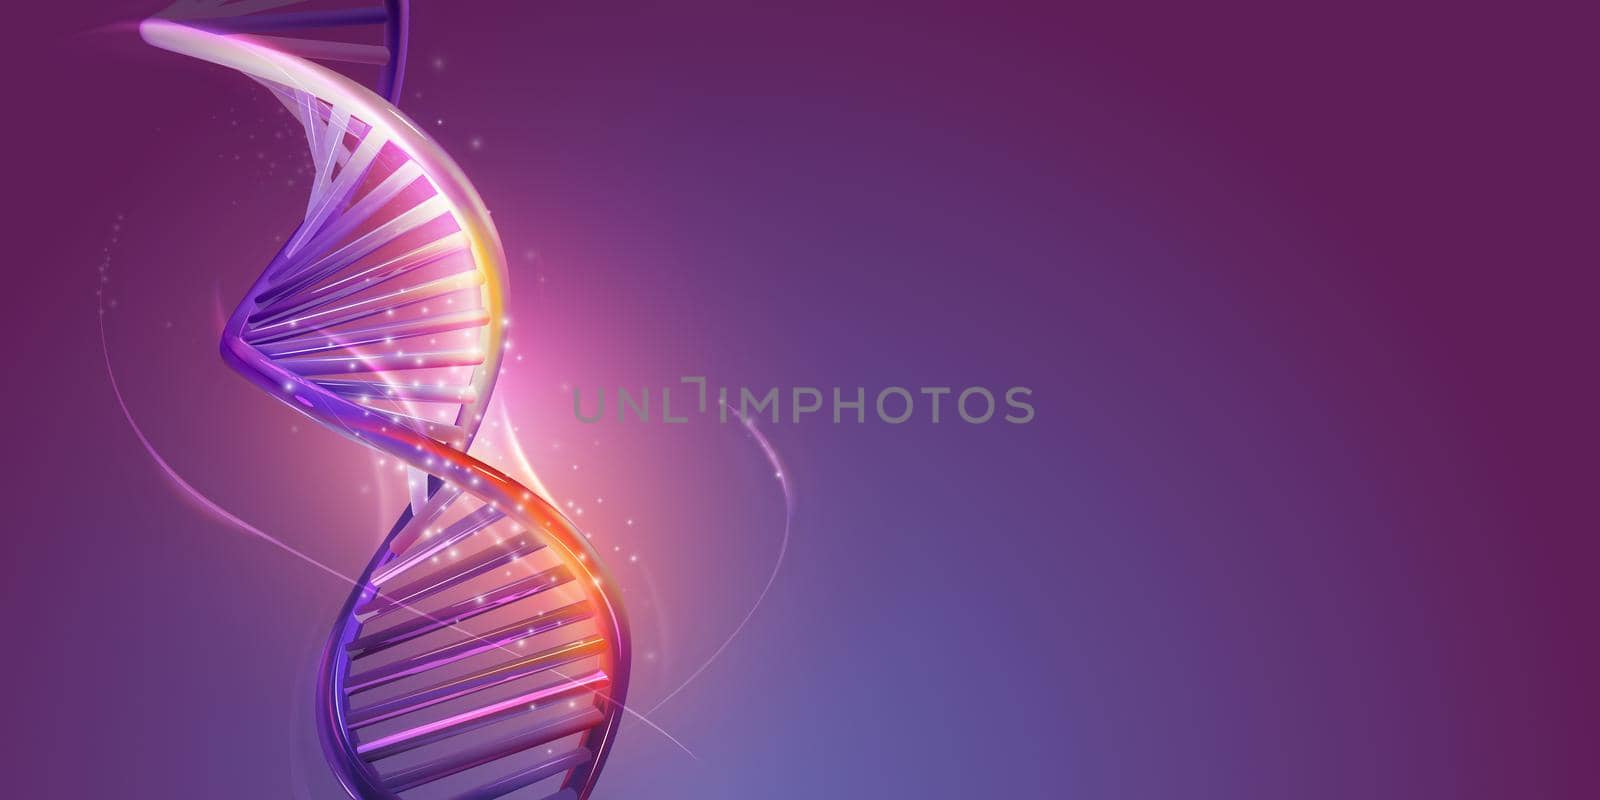 Structure of the DNA double helix with HUD elements on a purple background.